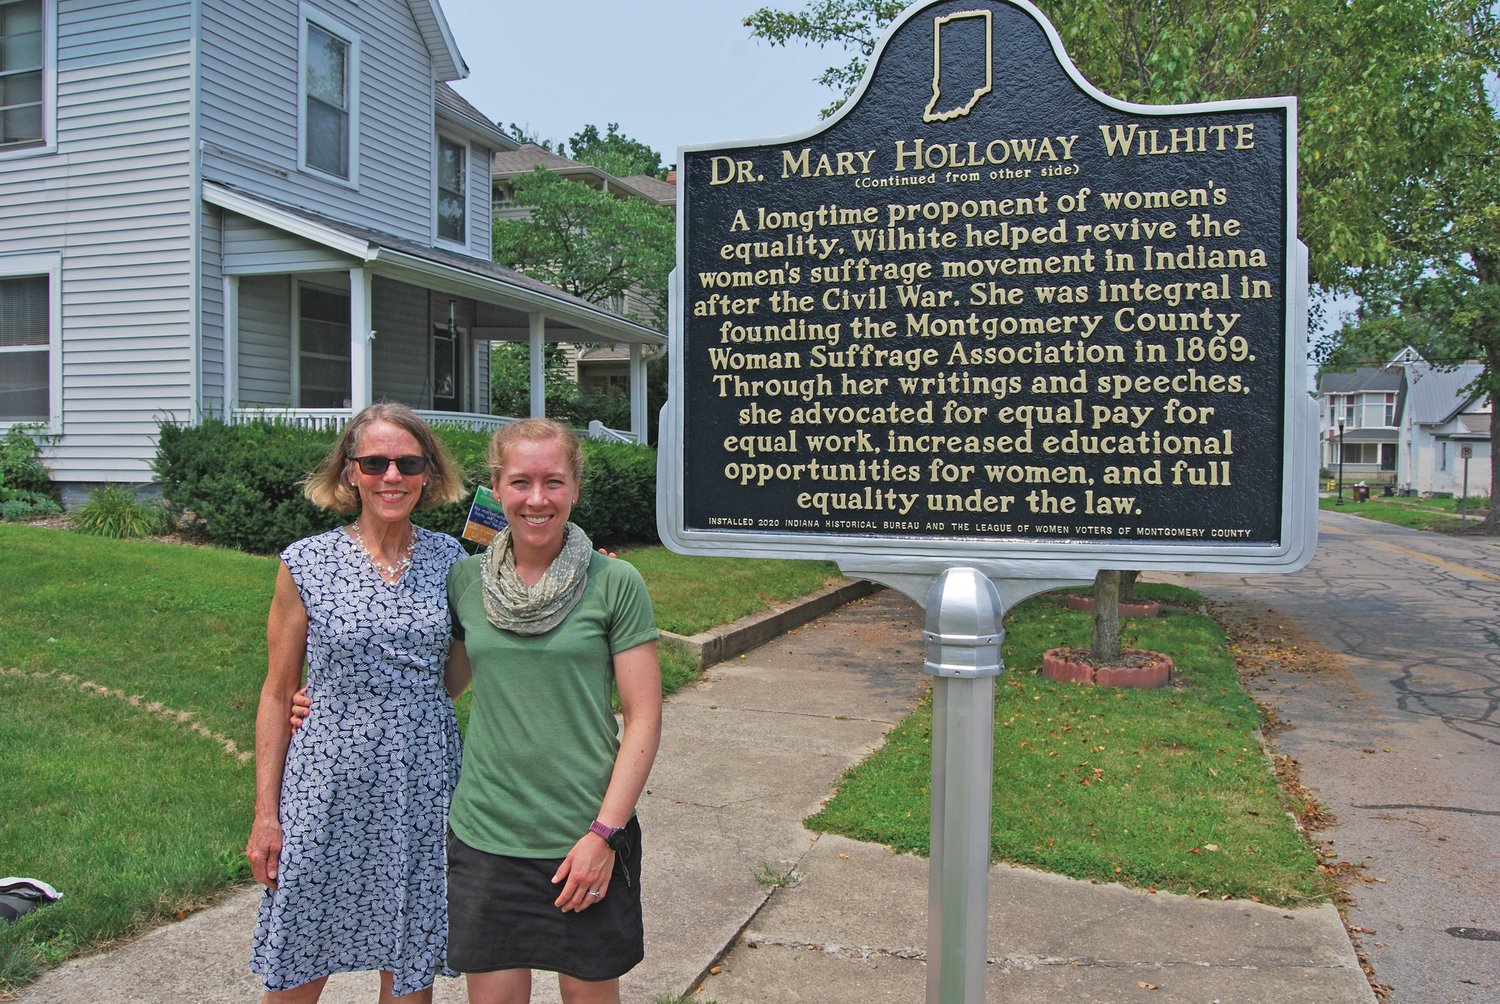 Joan Eaton, left, and her daughter, Claire Gibson, stand next to the historical marker for Dr. Mary Holloway Wilhite in Crawfordsville. Eaton and Gibson are descendants of Wilhite.